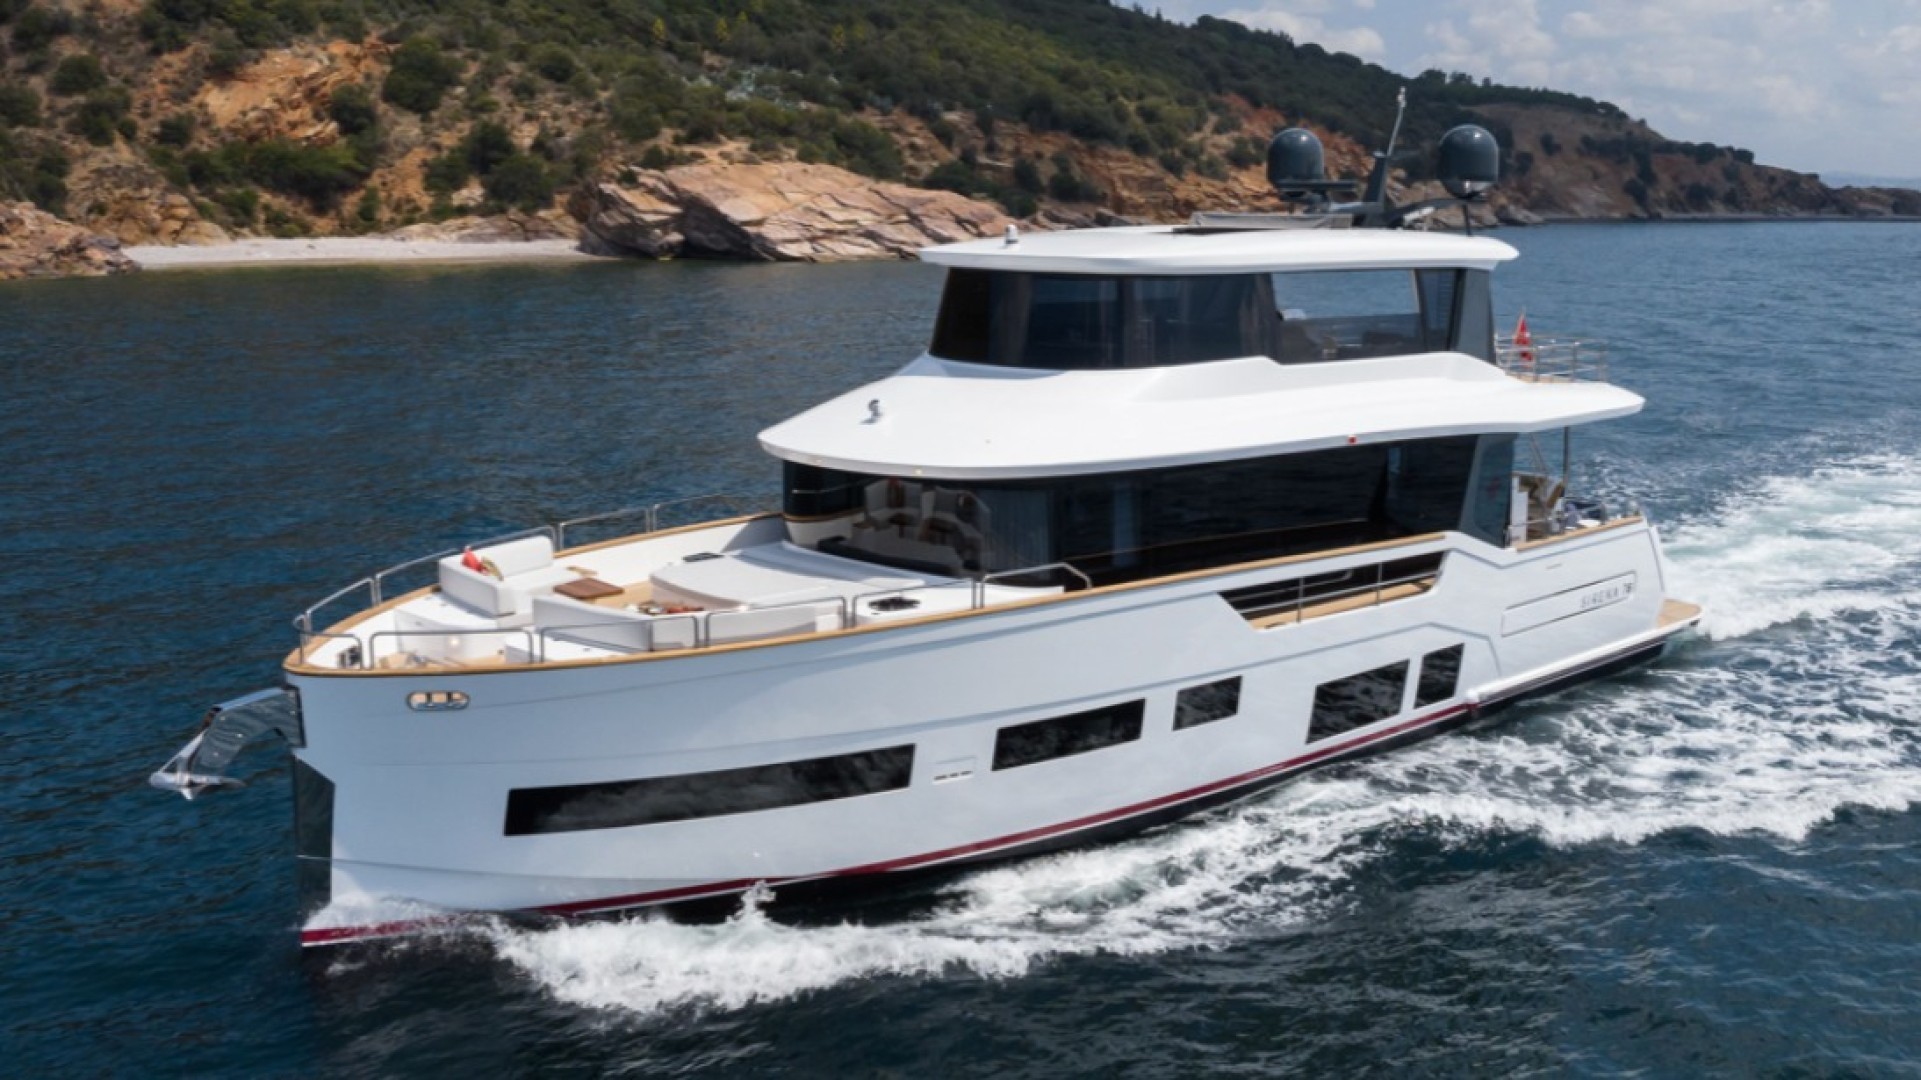 Brave new Sirena 78 makes her debut at the Cannes